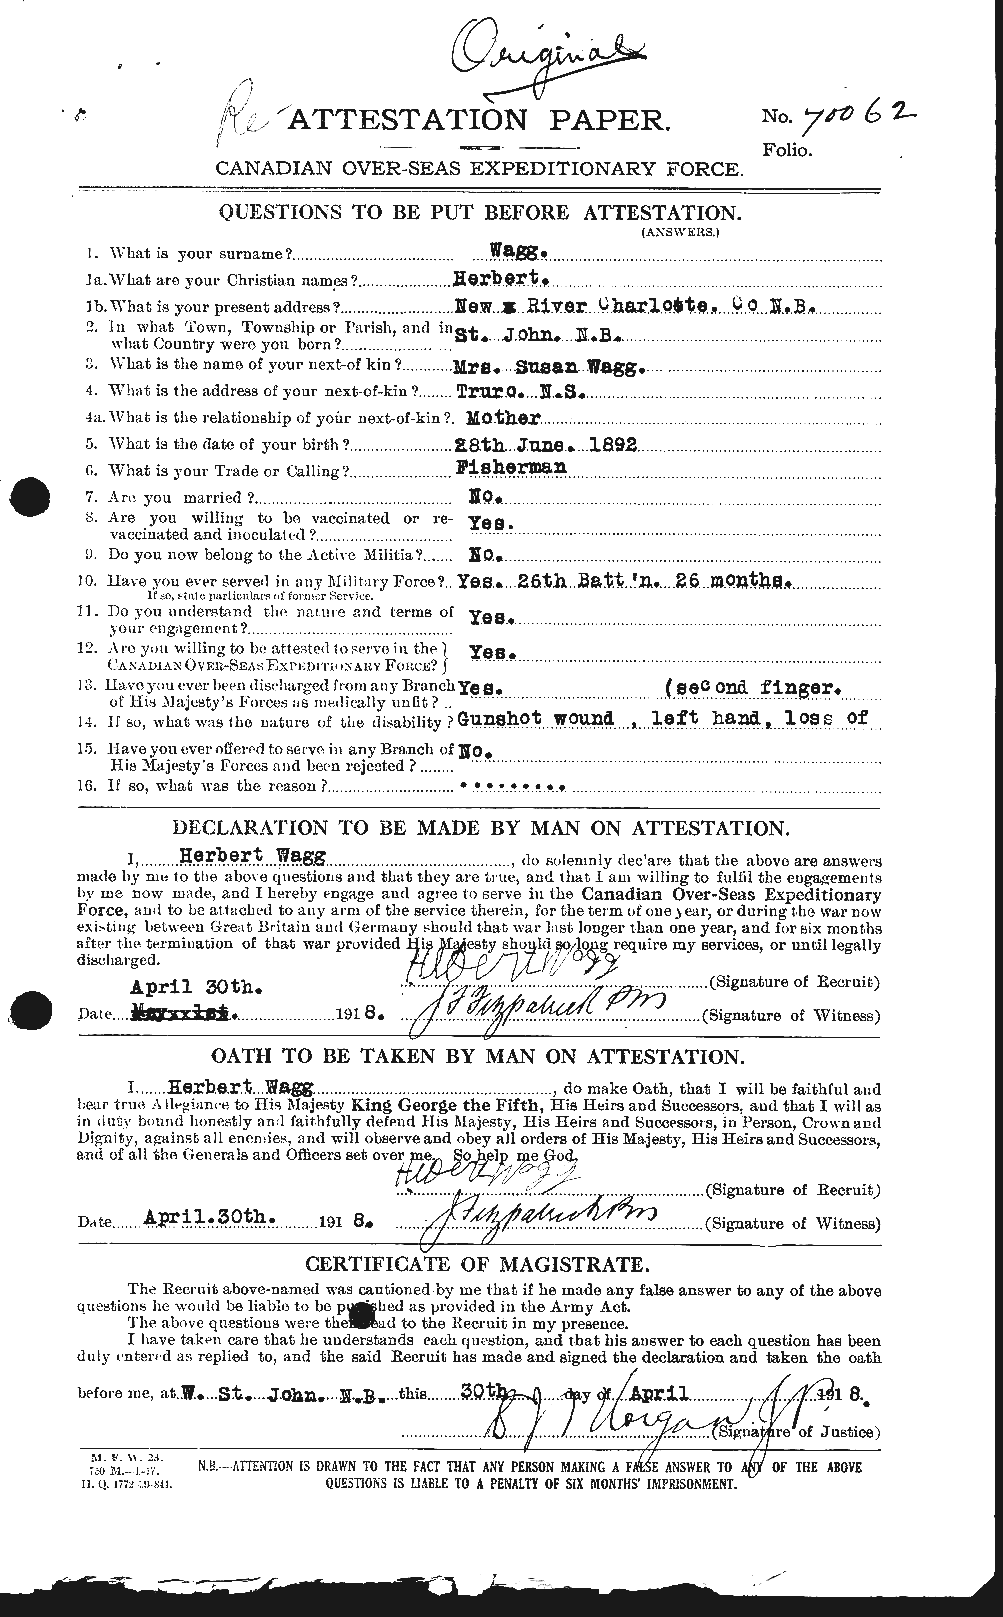 Personnel Records of the First World War - CEF 651475a